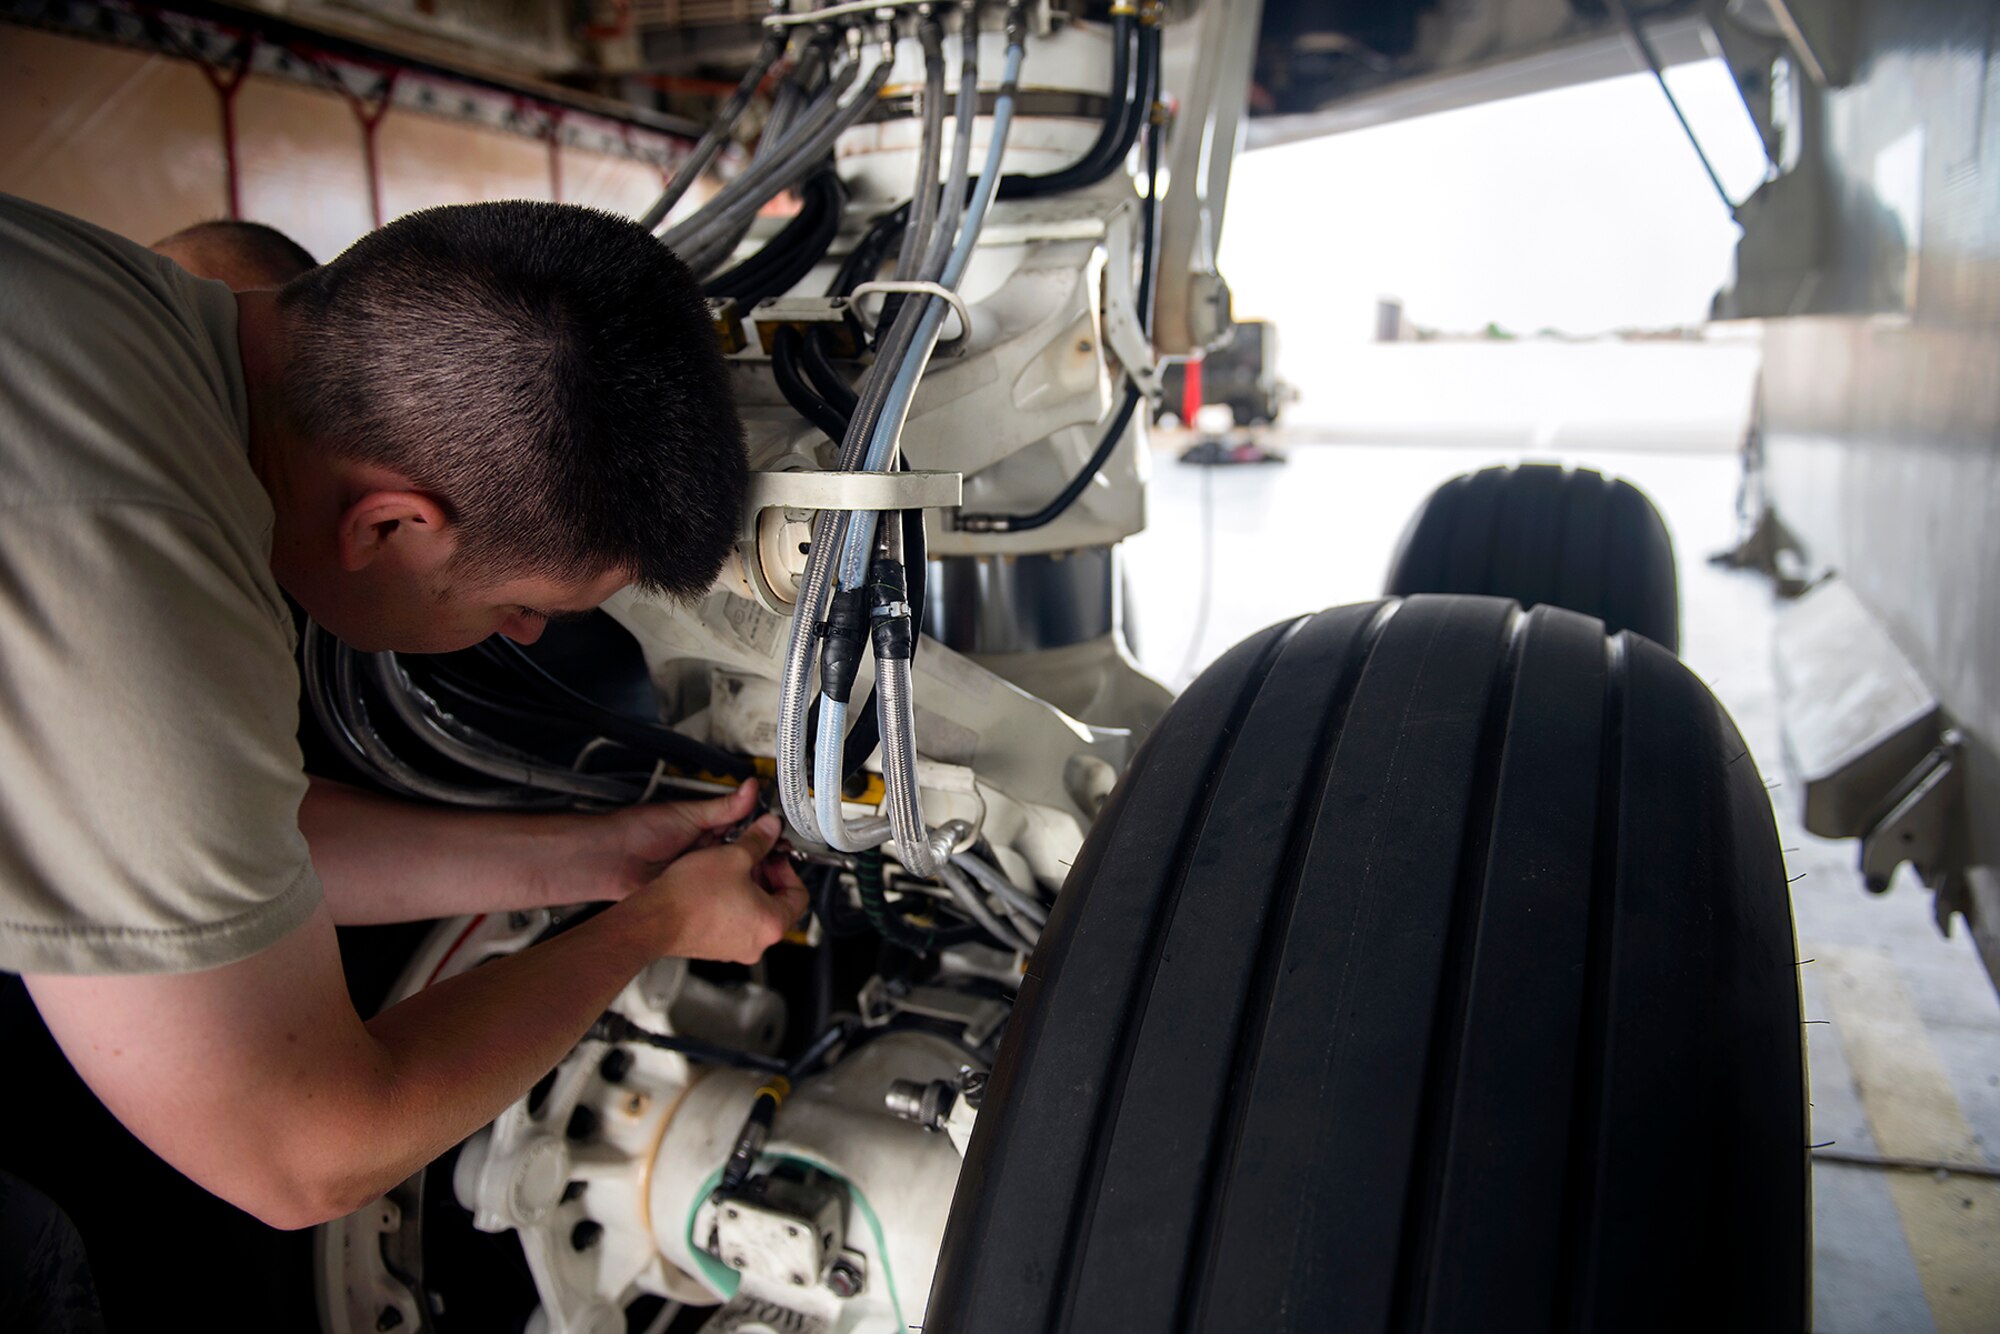 The 509th Aircraft Maintenance Squadron Airmen are the keepers of the B-2 Spirit. From landing gear to the steering system, it takes approximately one year for a member to be certified to perform maintenance on the aircraft. A full inspection of a B-2 typically takes three to four days. Every square inch of the aircraft is carefully scrutinized to ensure maximum combat readiness and a deployable force capable of projecting global firepower at a moment's notice, anytime and anywhere.